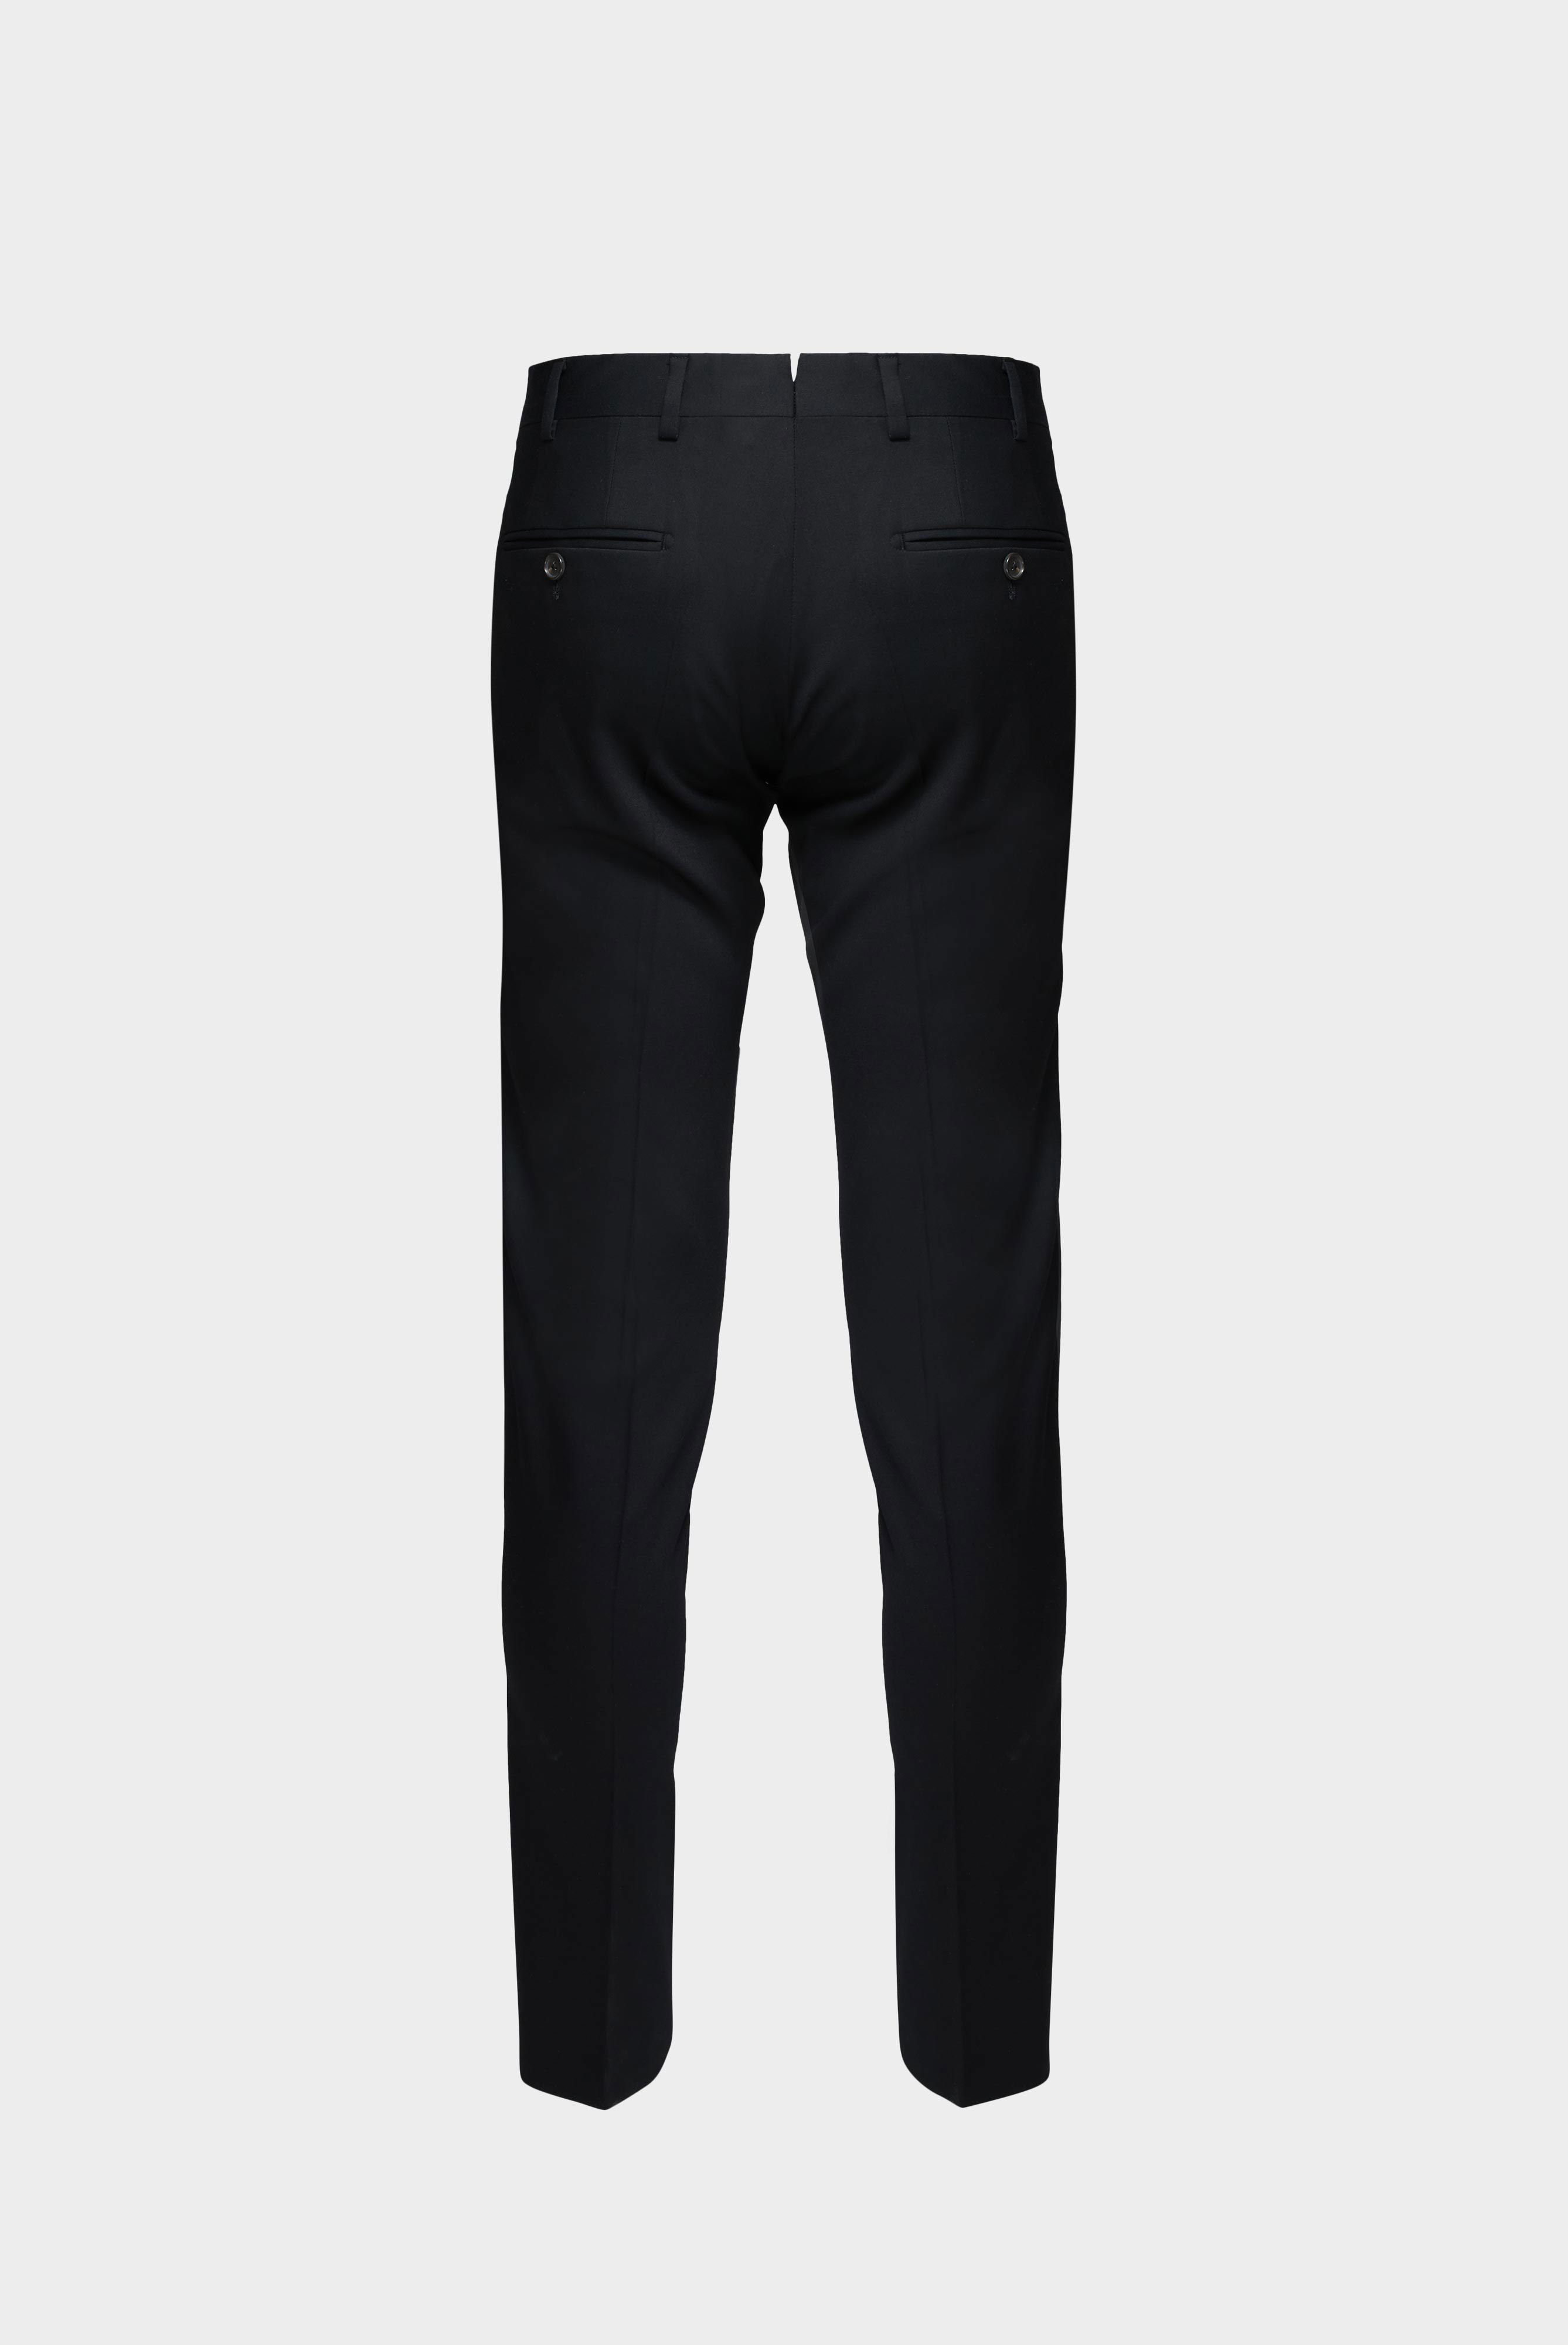 Jeans & Trousers+Wool Trousers Slim Fit+20.7880.16.H01010.099.102